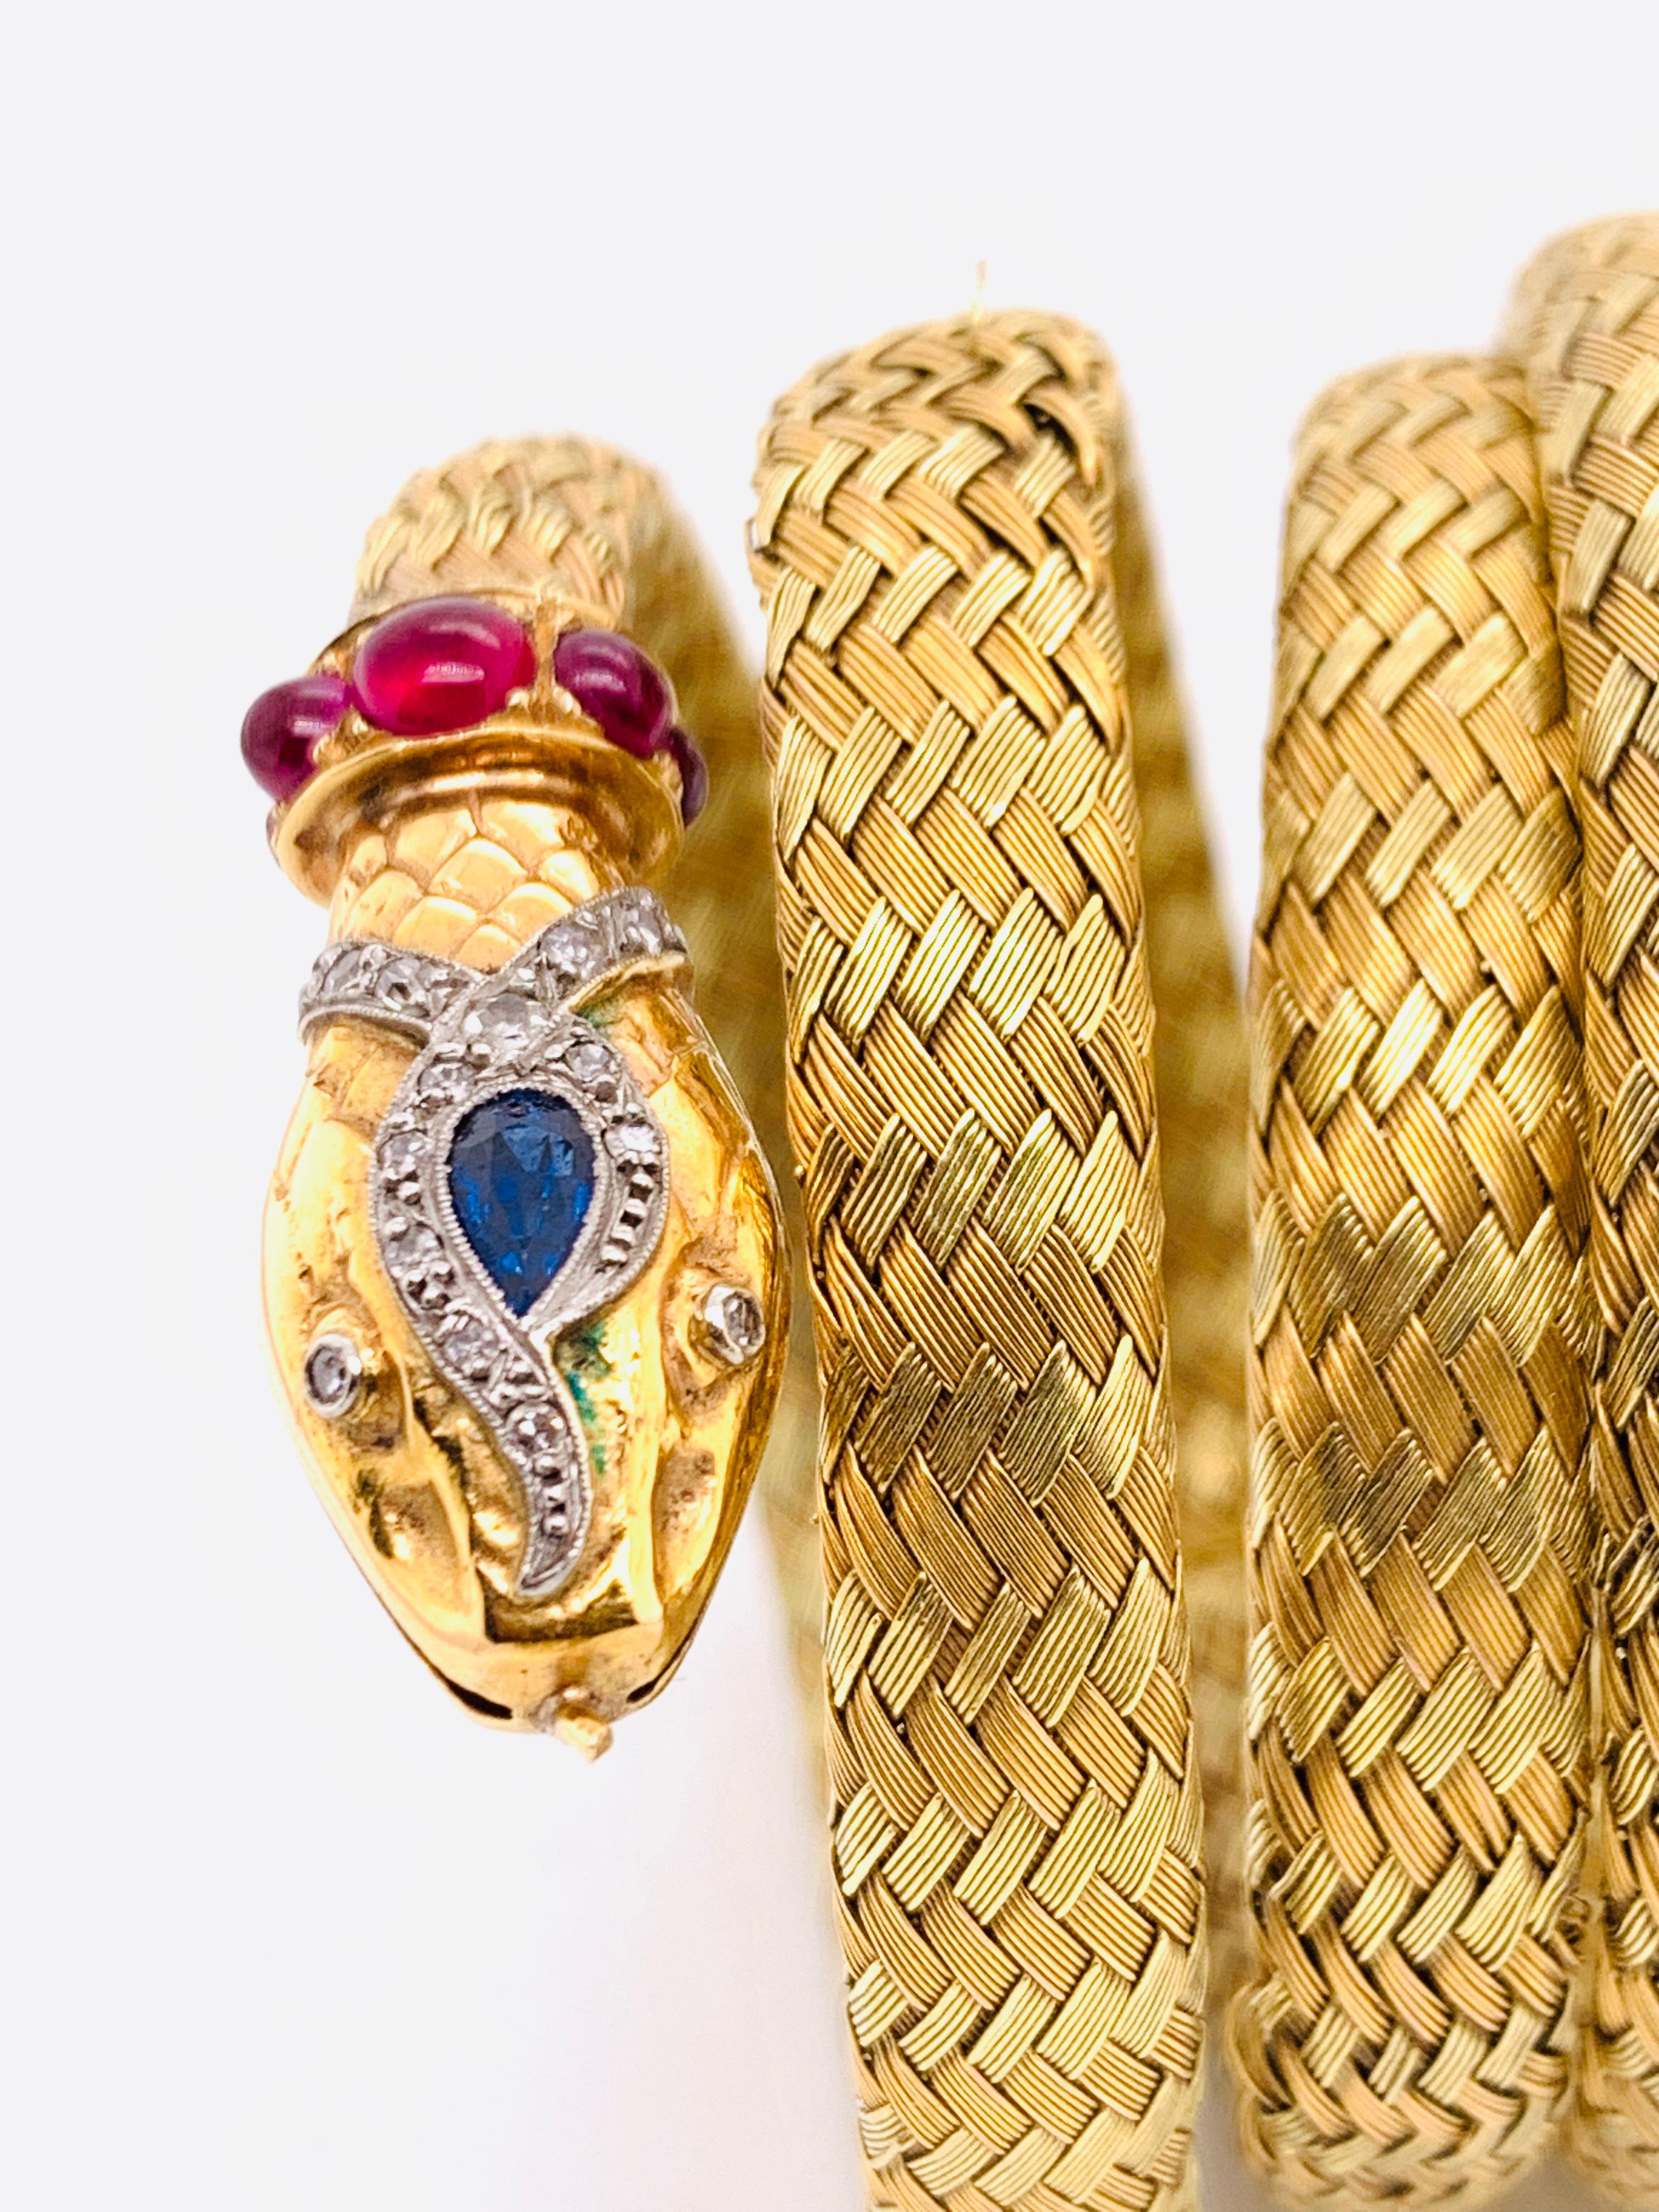 An antique French, yellow and red woven gold, snake bracelet, with eight-cut diamonds and a pear shape sapphire set in the head with cabochon-cut rubies around the neck. With a French eagle mark and numbered 6 or 9 maker's mark, circa 1880.